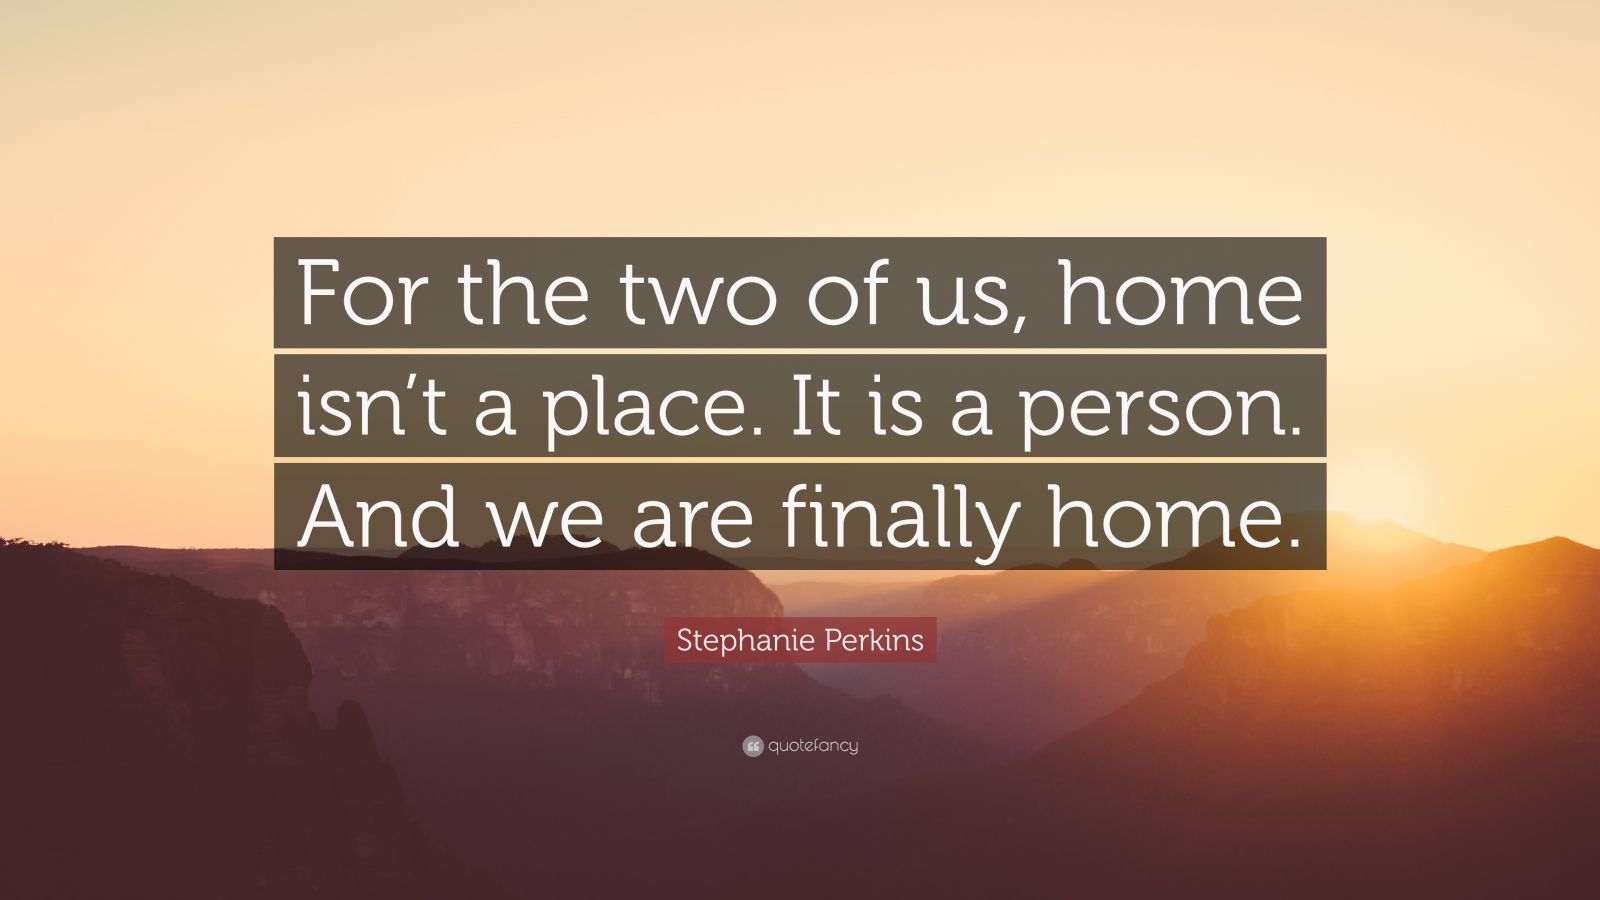 Stephanie Perkins Quote: “This is home. The two of us.”